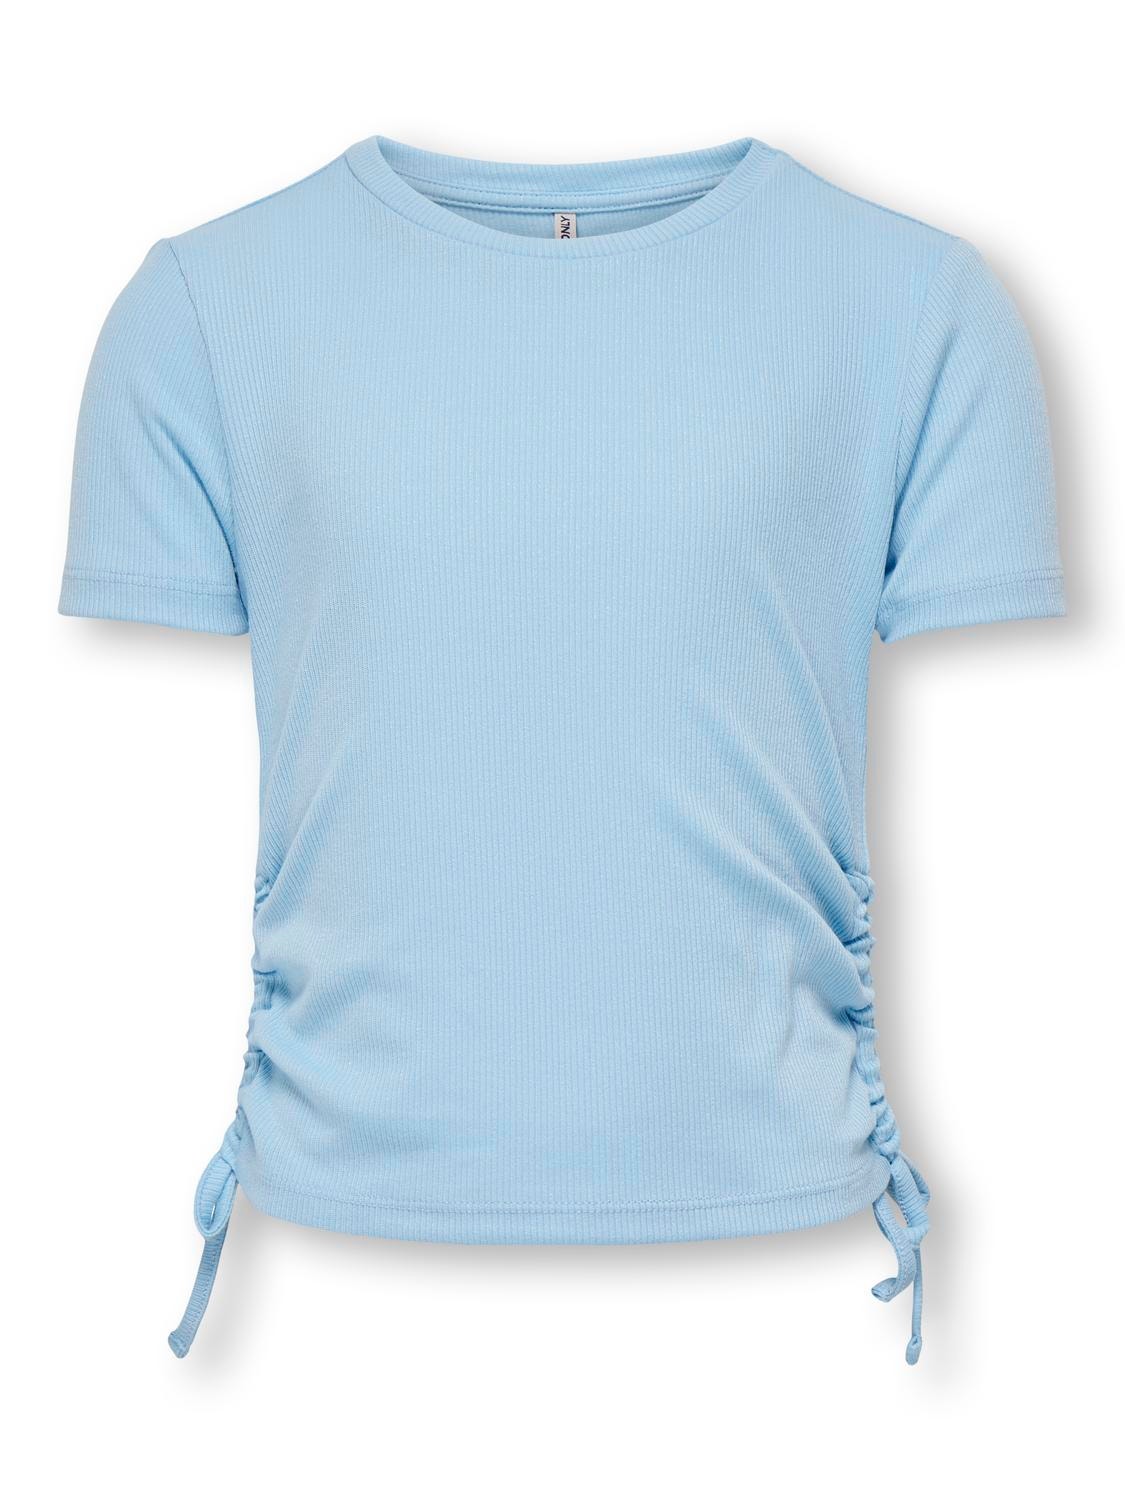 ONLY Slim Fit Round Neck T-Shirt -Clear Sky - 15294733